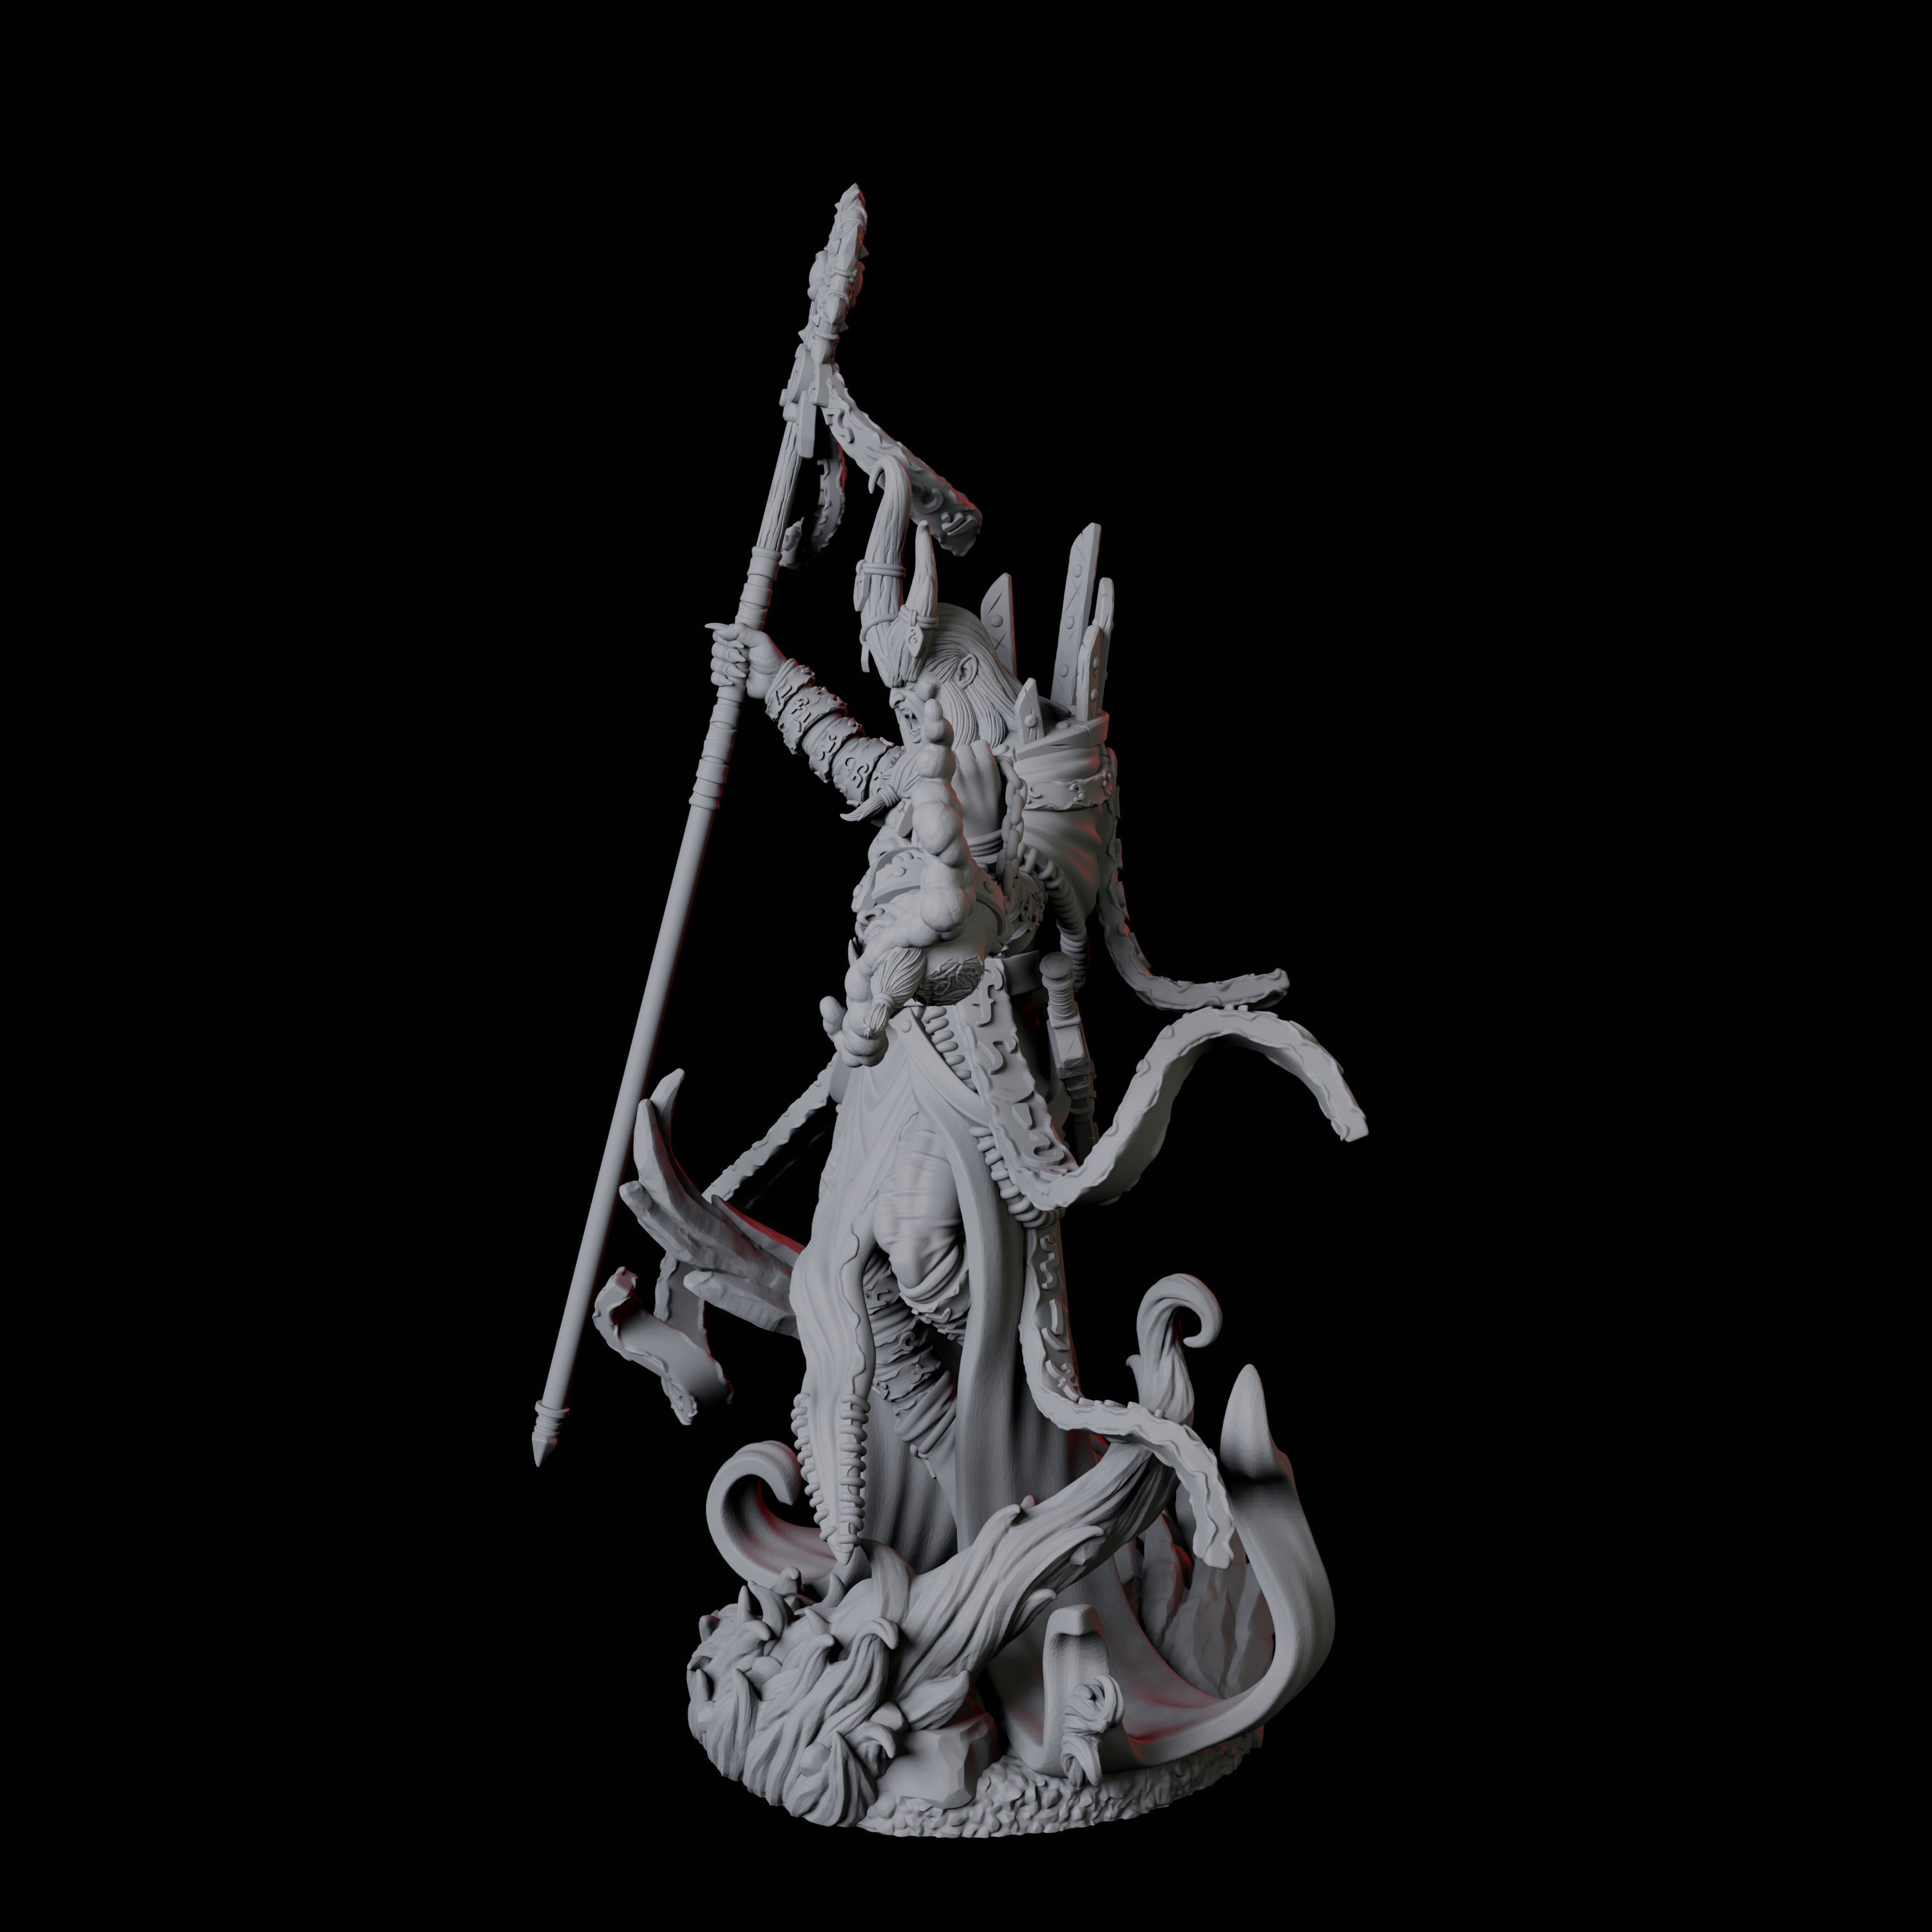 Casting Warlock Miniature for Dungeons and Dragons, Pathfinder or other TTRPGs